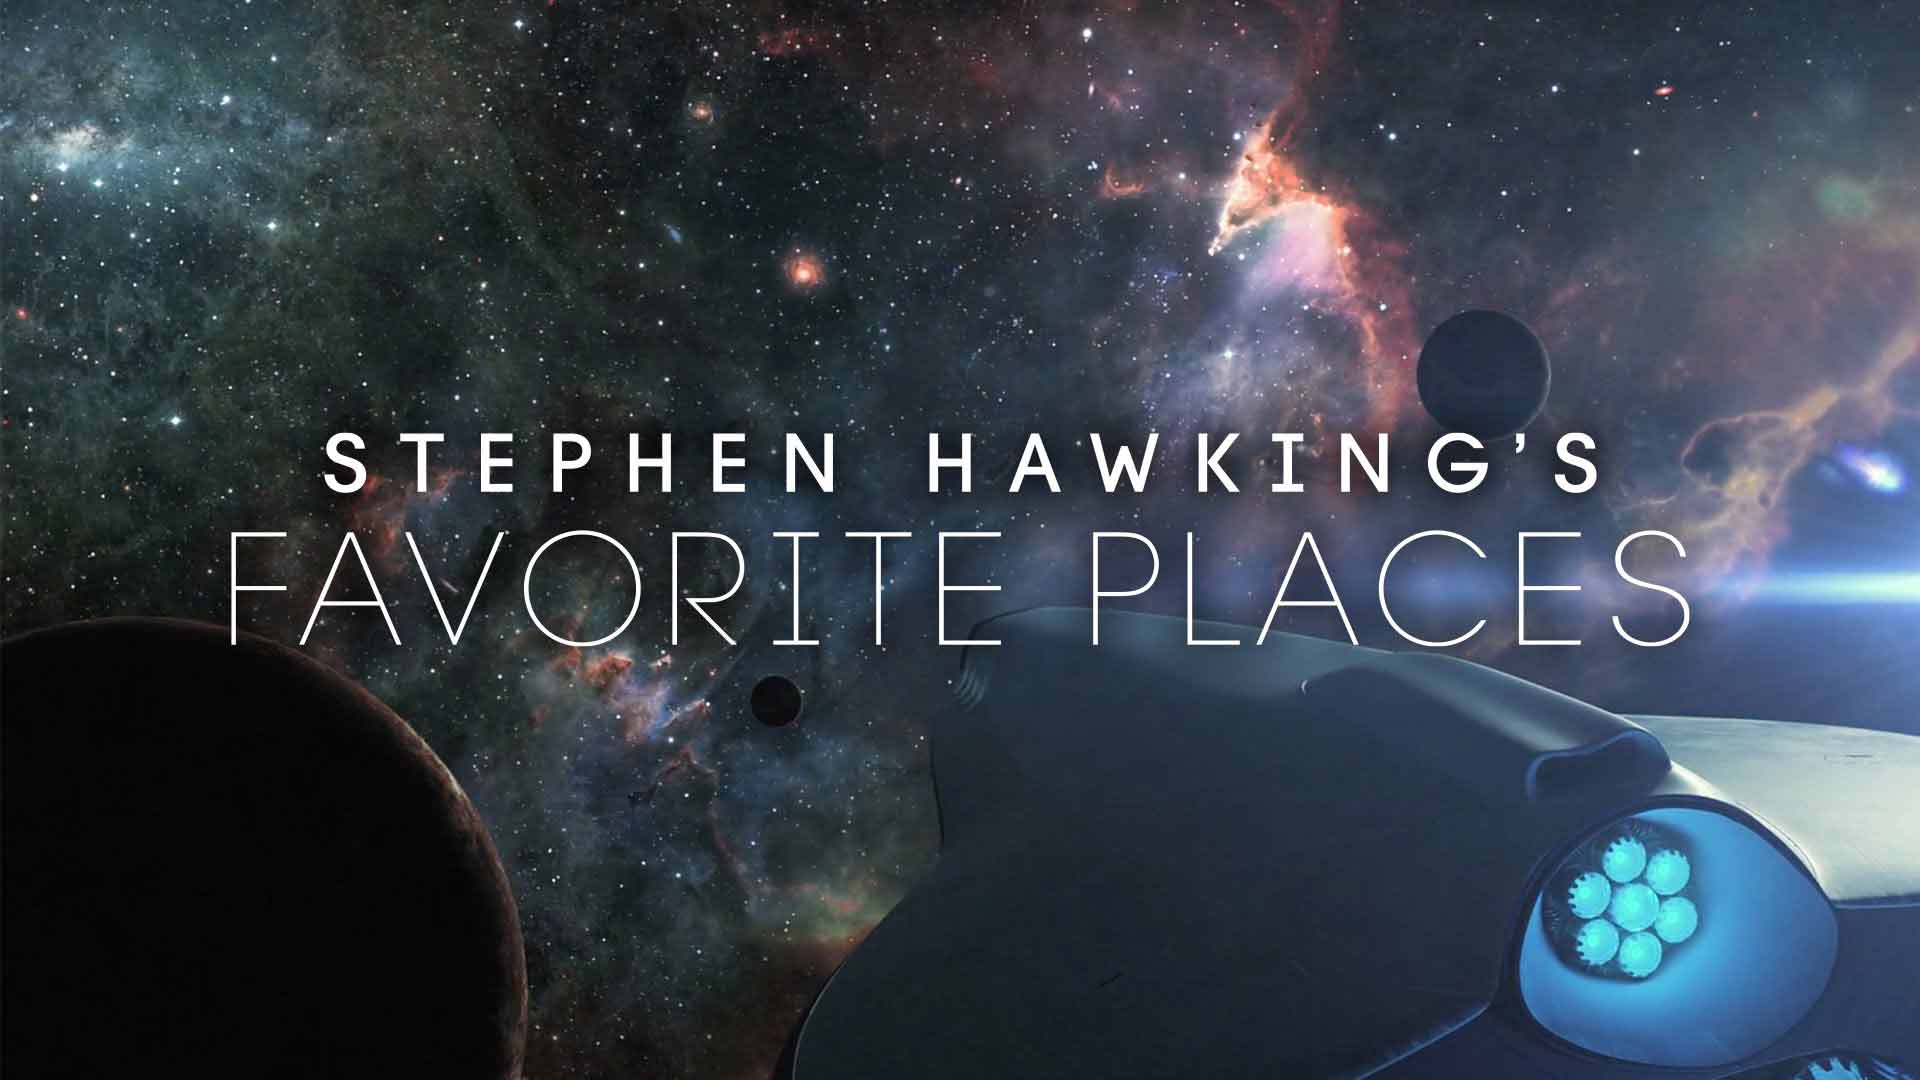 Stephen Hawking's Favorite Places with spaceship and starfield